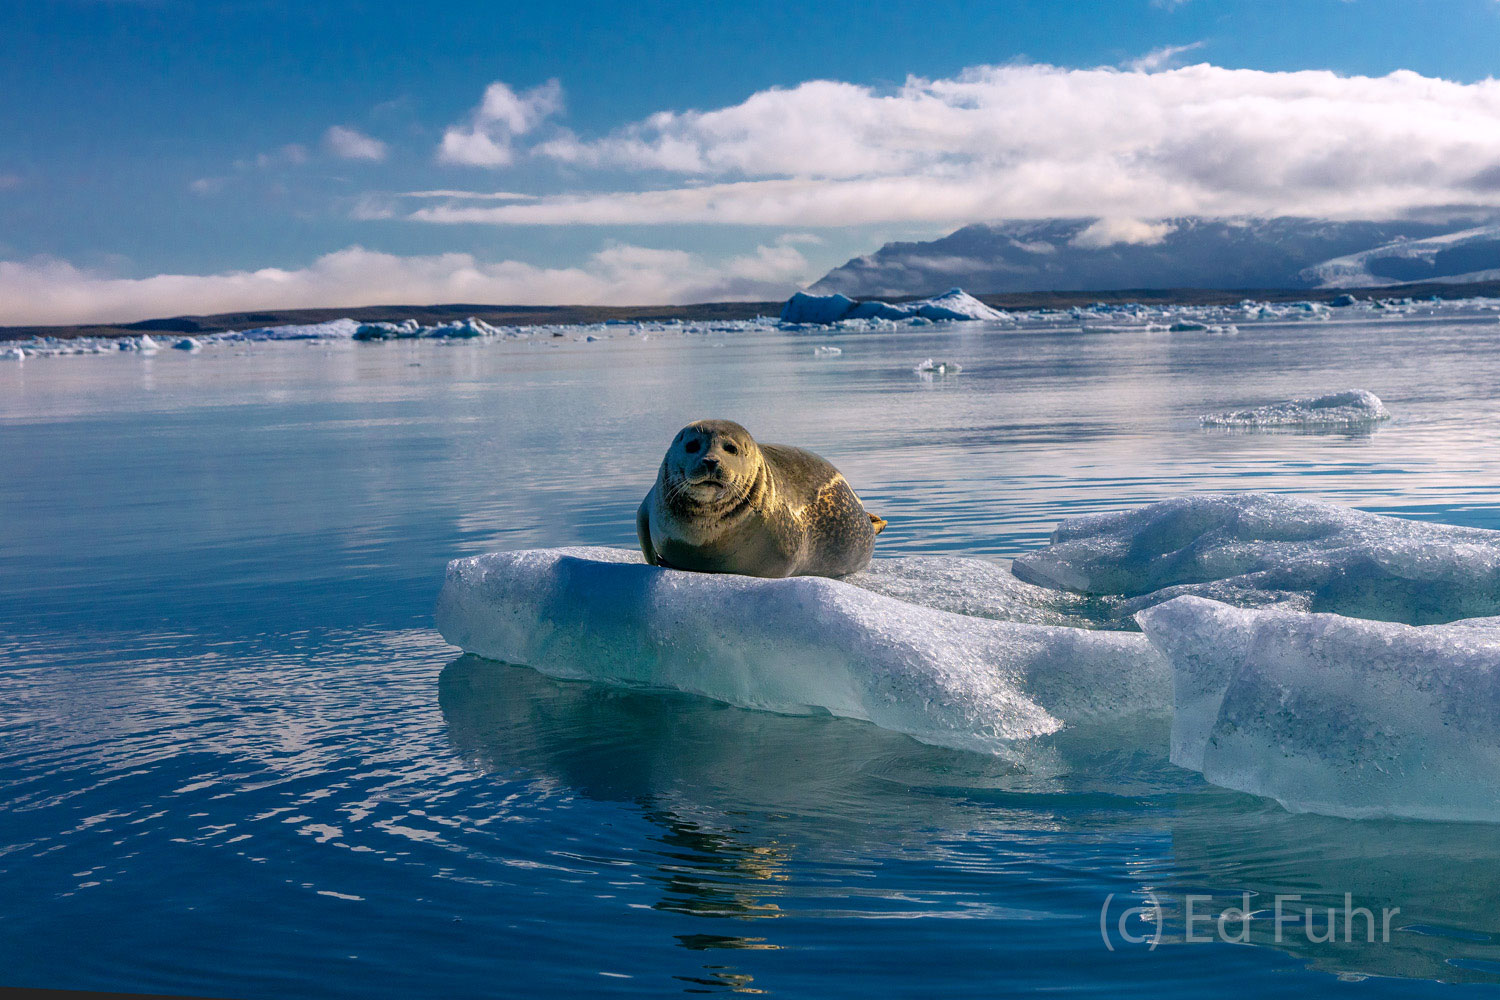 A seal soaks up some sun and warmth on a ice floe.